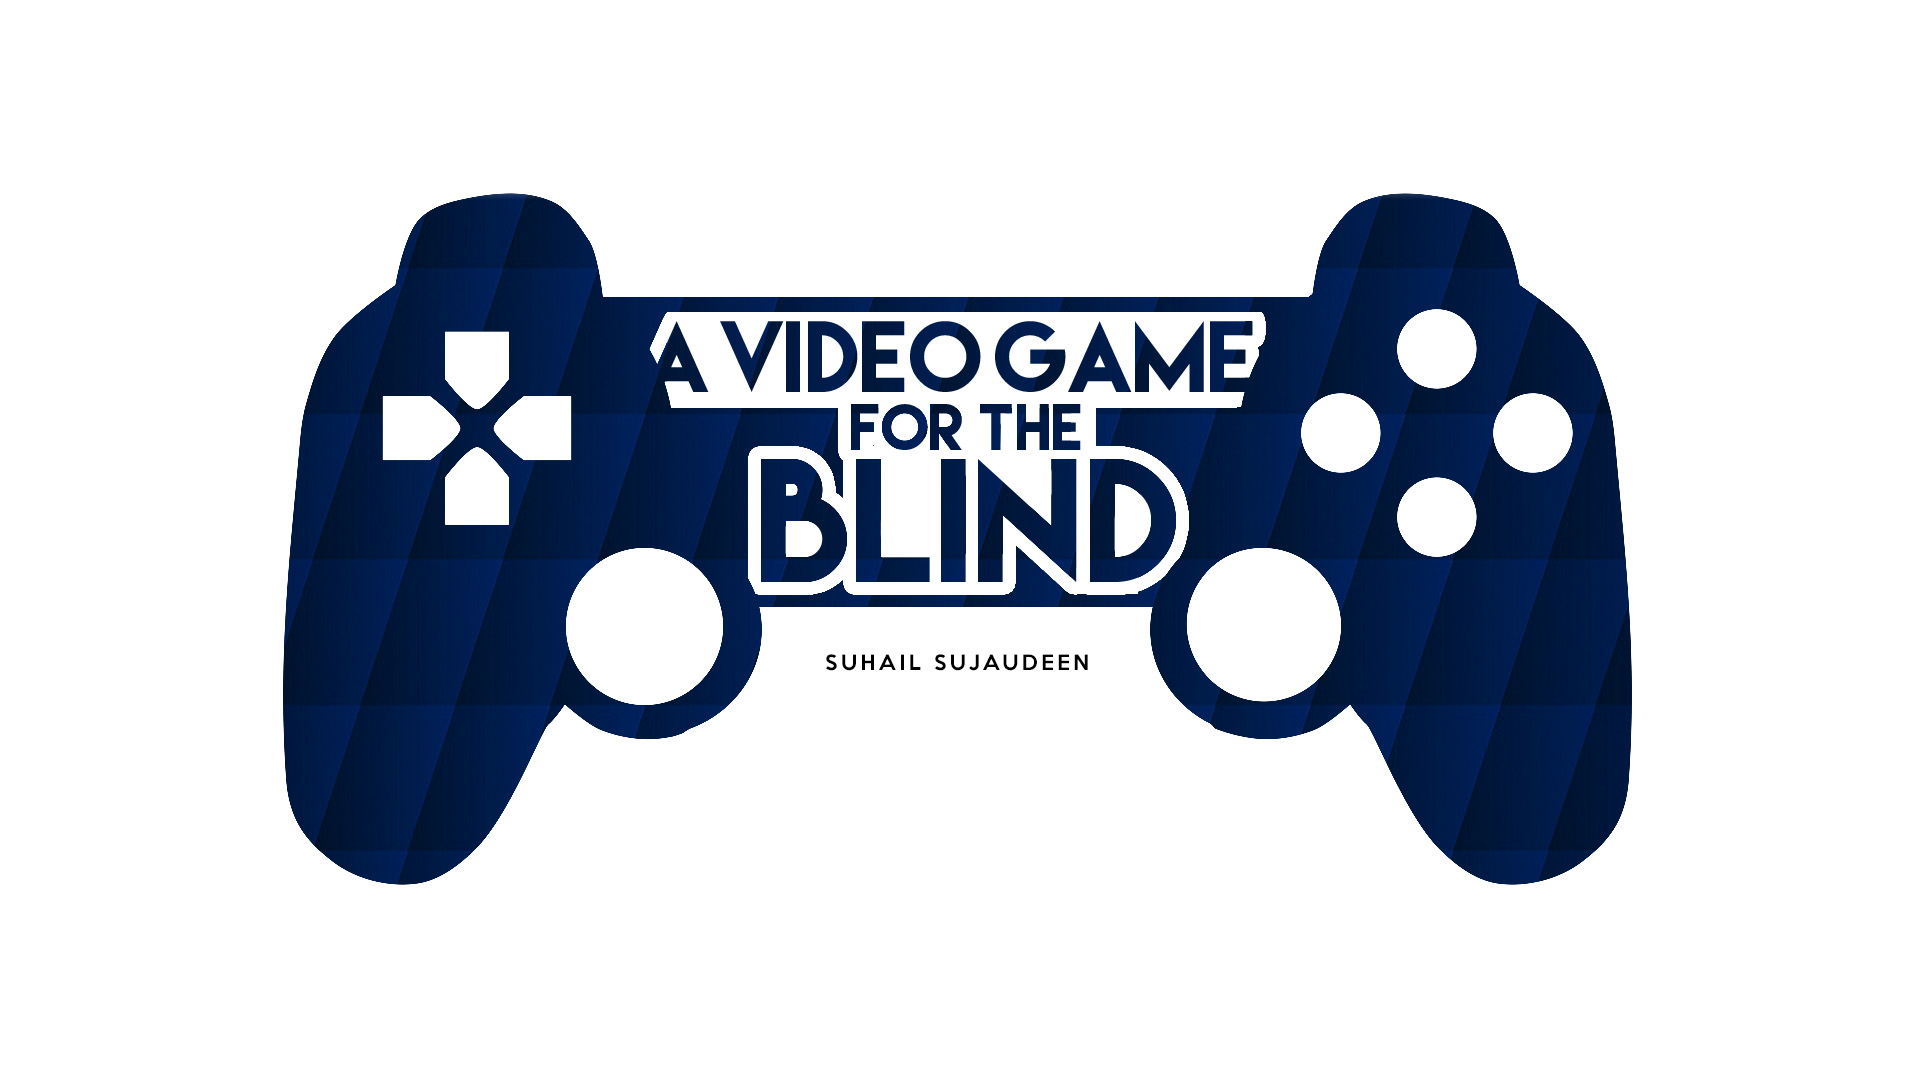 A Video Game for the Blind